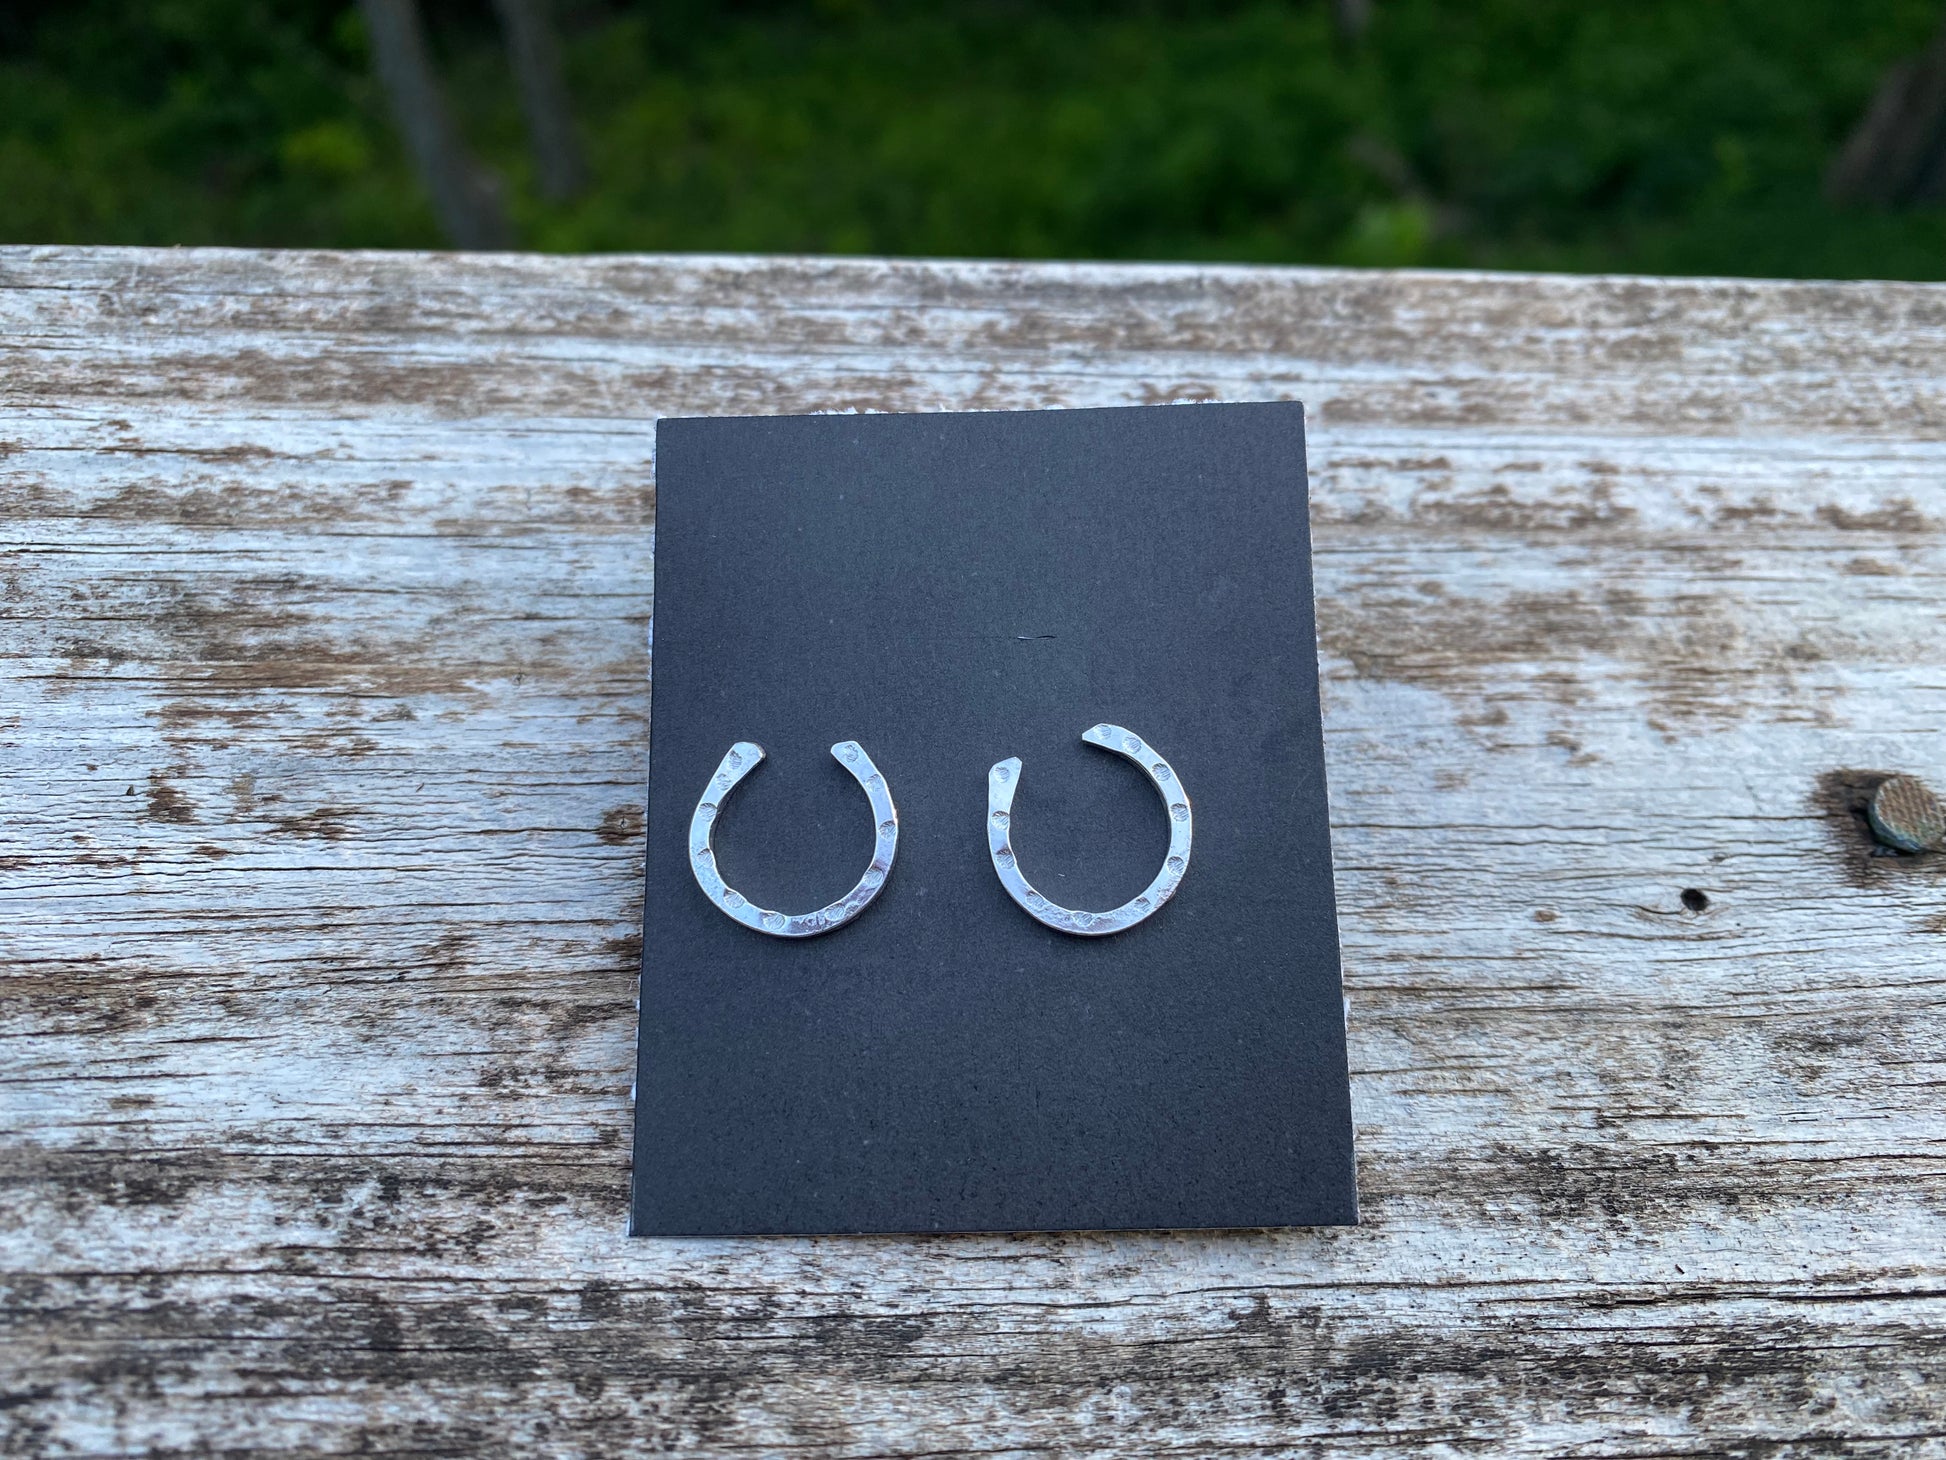 Horseshoe silver studs - collectionsbytracy.com